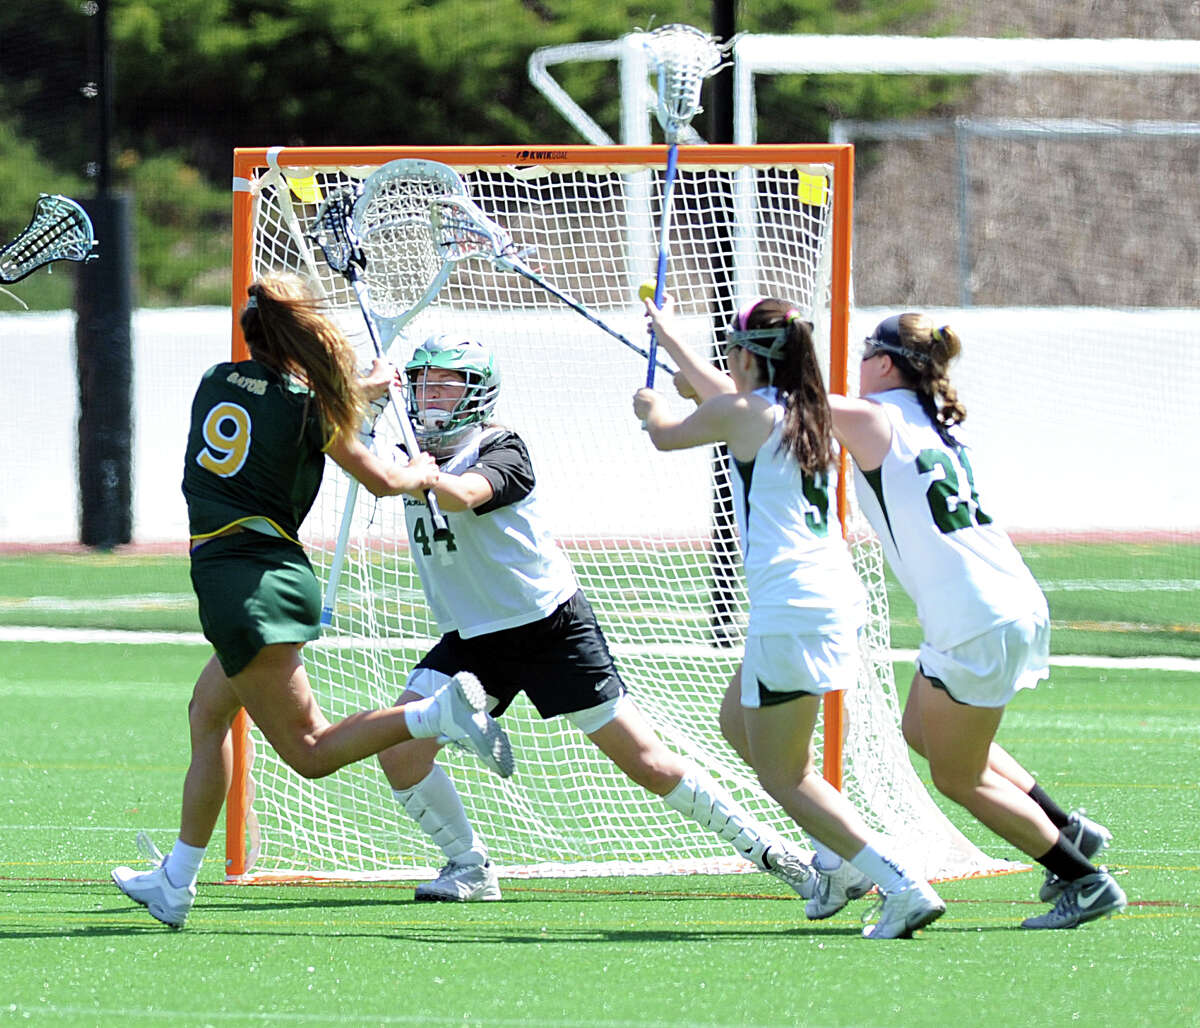 Greenwich Academy’s Karina Schulze, left, scores a first-half goal past Sacred Heart goalie Maddie McLane while being defended by Sacred Heart’s Emily Micciulli, 9, and Ellen Purcel at Greenwich Academy on Saturday. Schulze scored five goals and Greenwich Academy won 12-9.